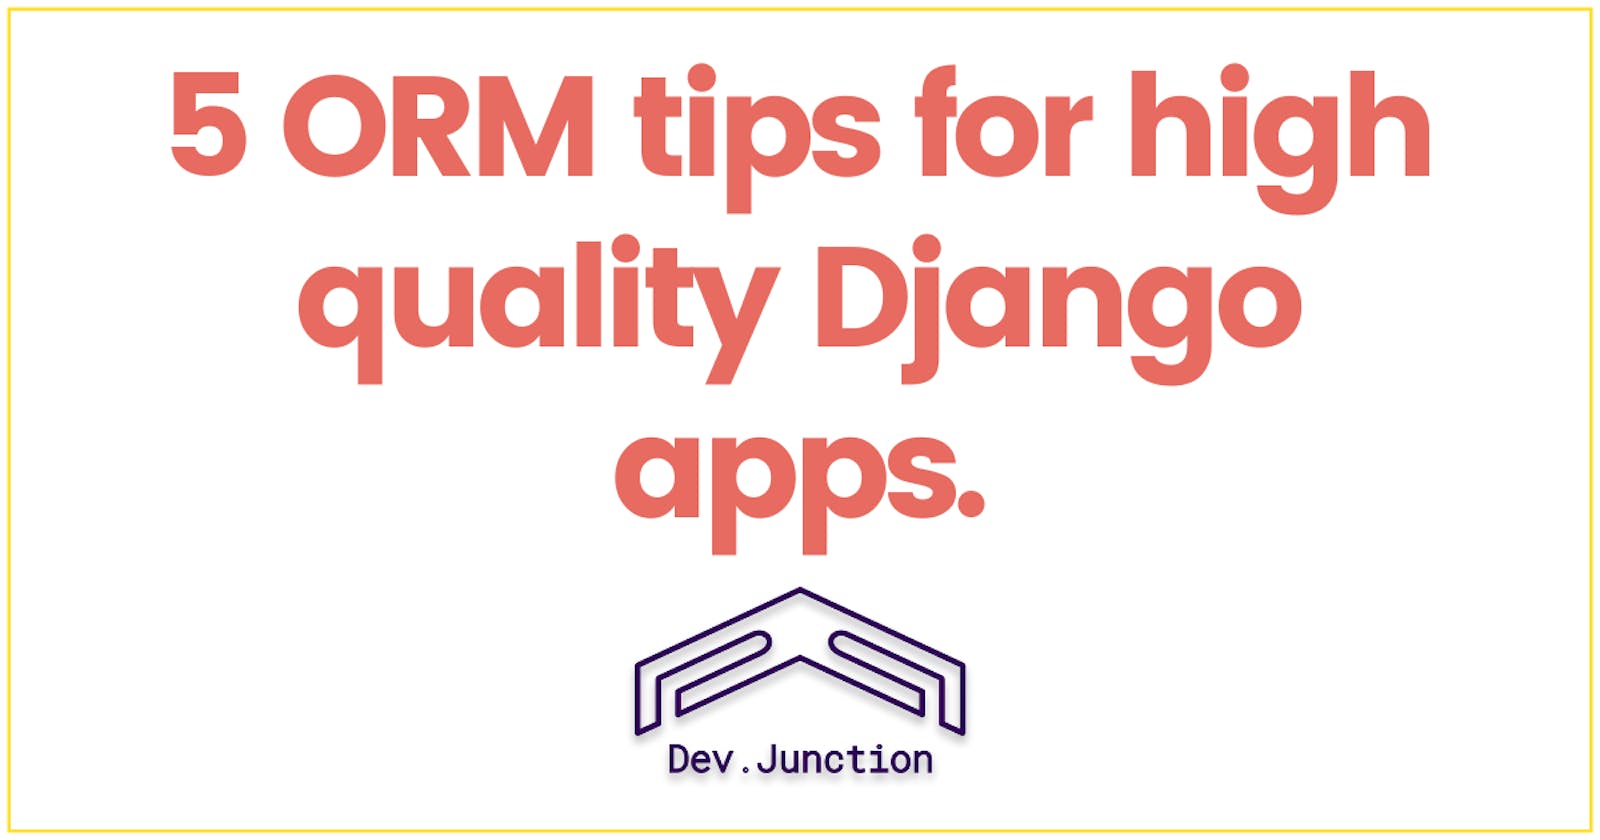 Top 5 ORM tips to write high quality Django apps.